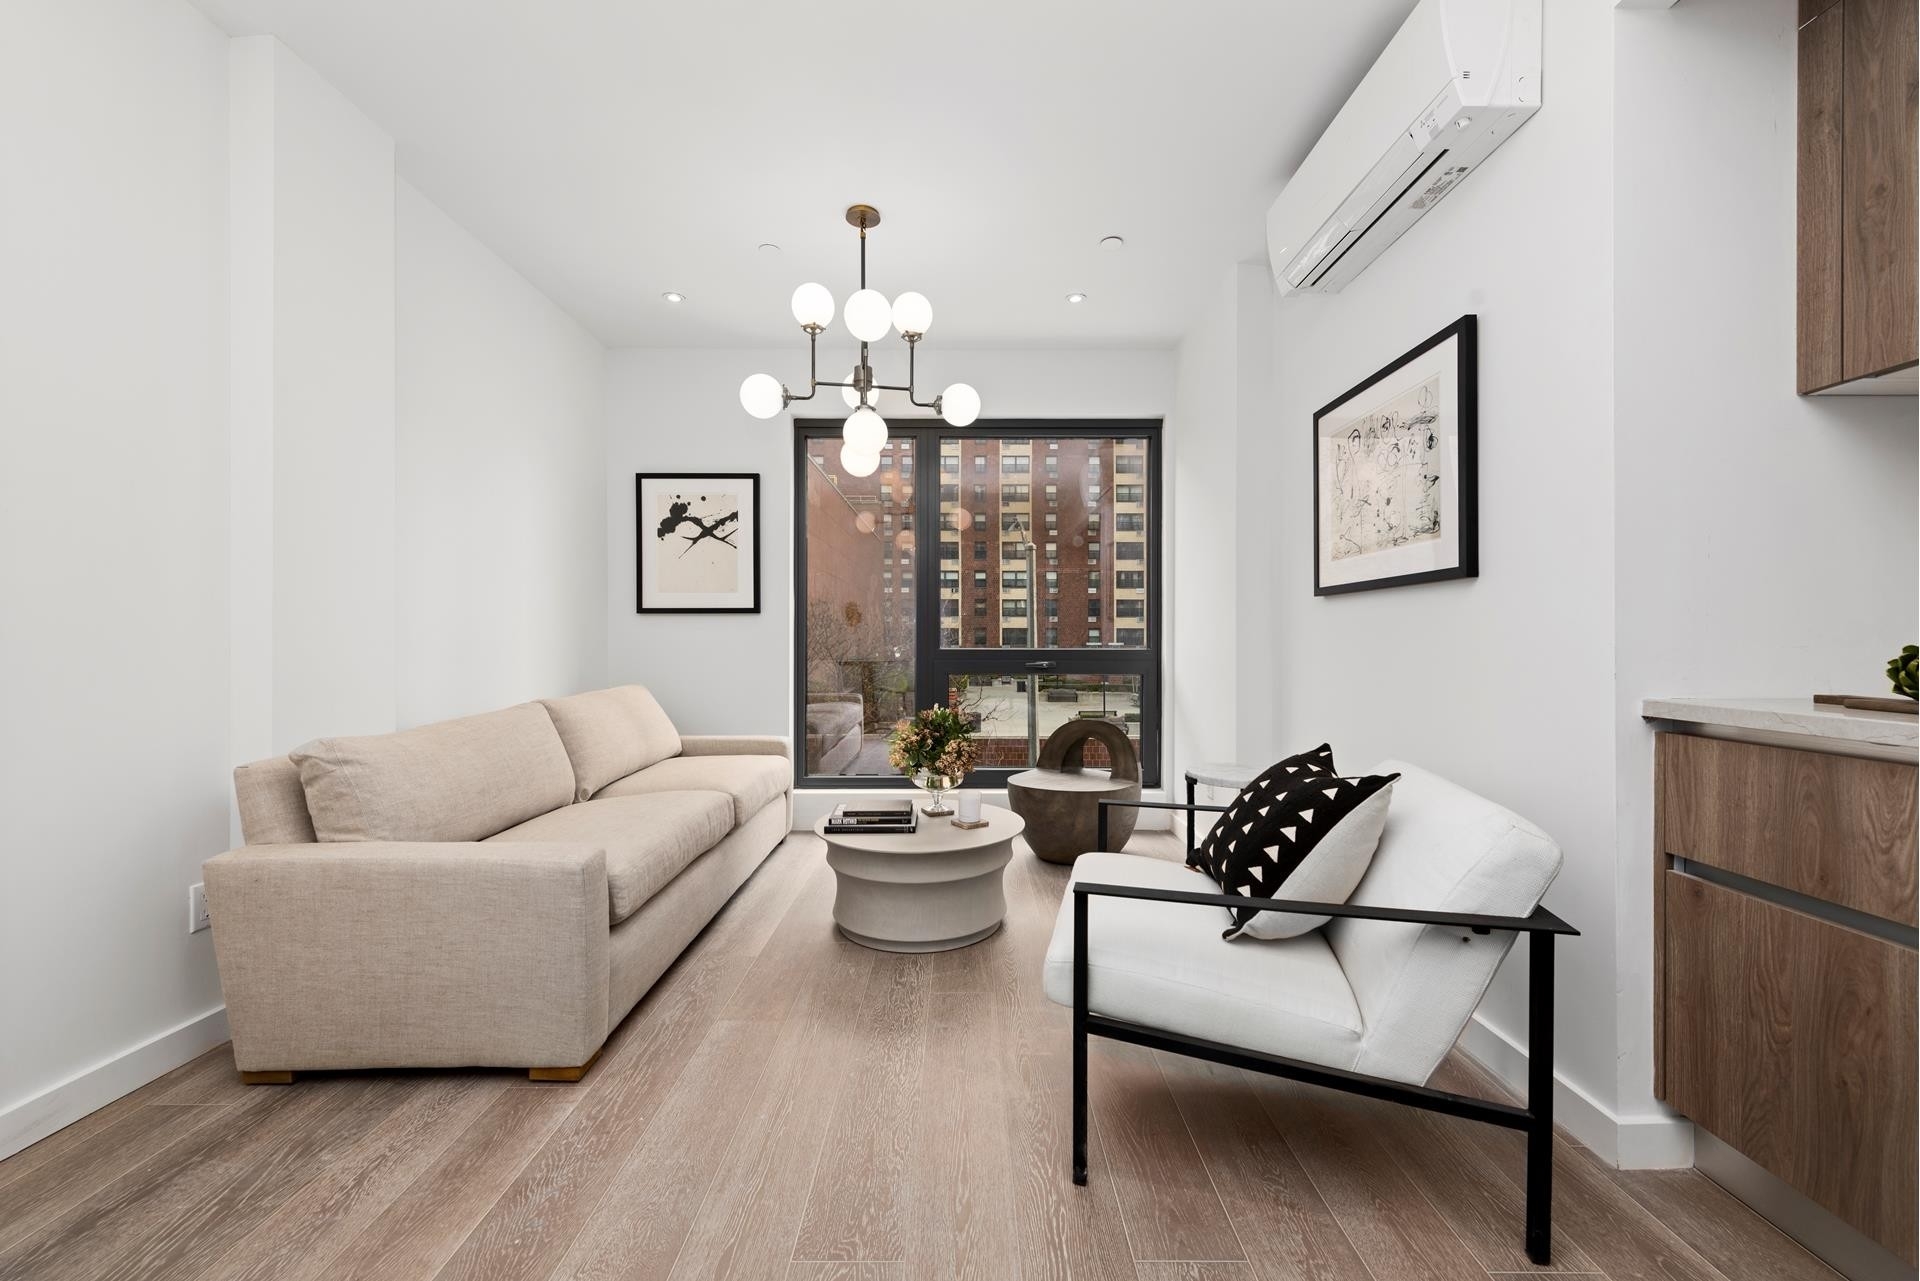 Condominium for Sale at Alston, 308 W 133RD ST, 5B Central Harlem, New York, NY 10030